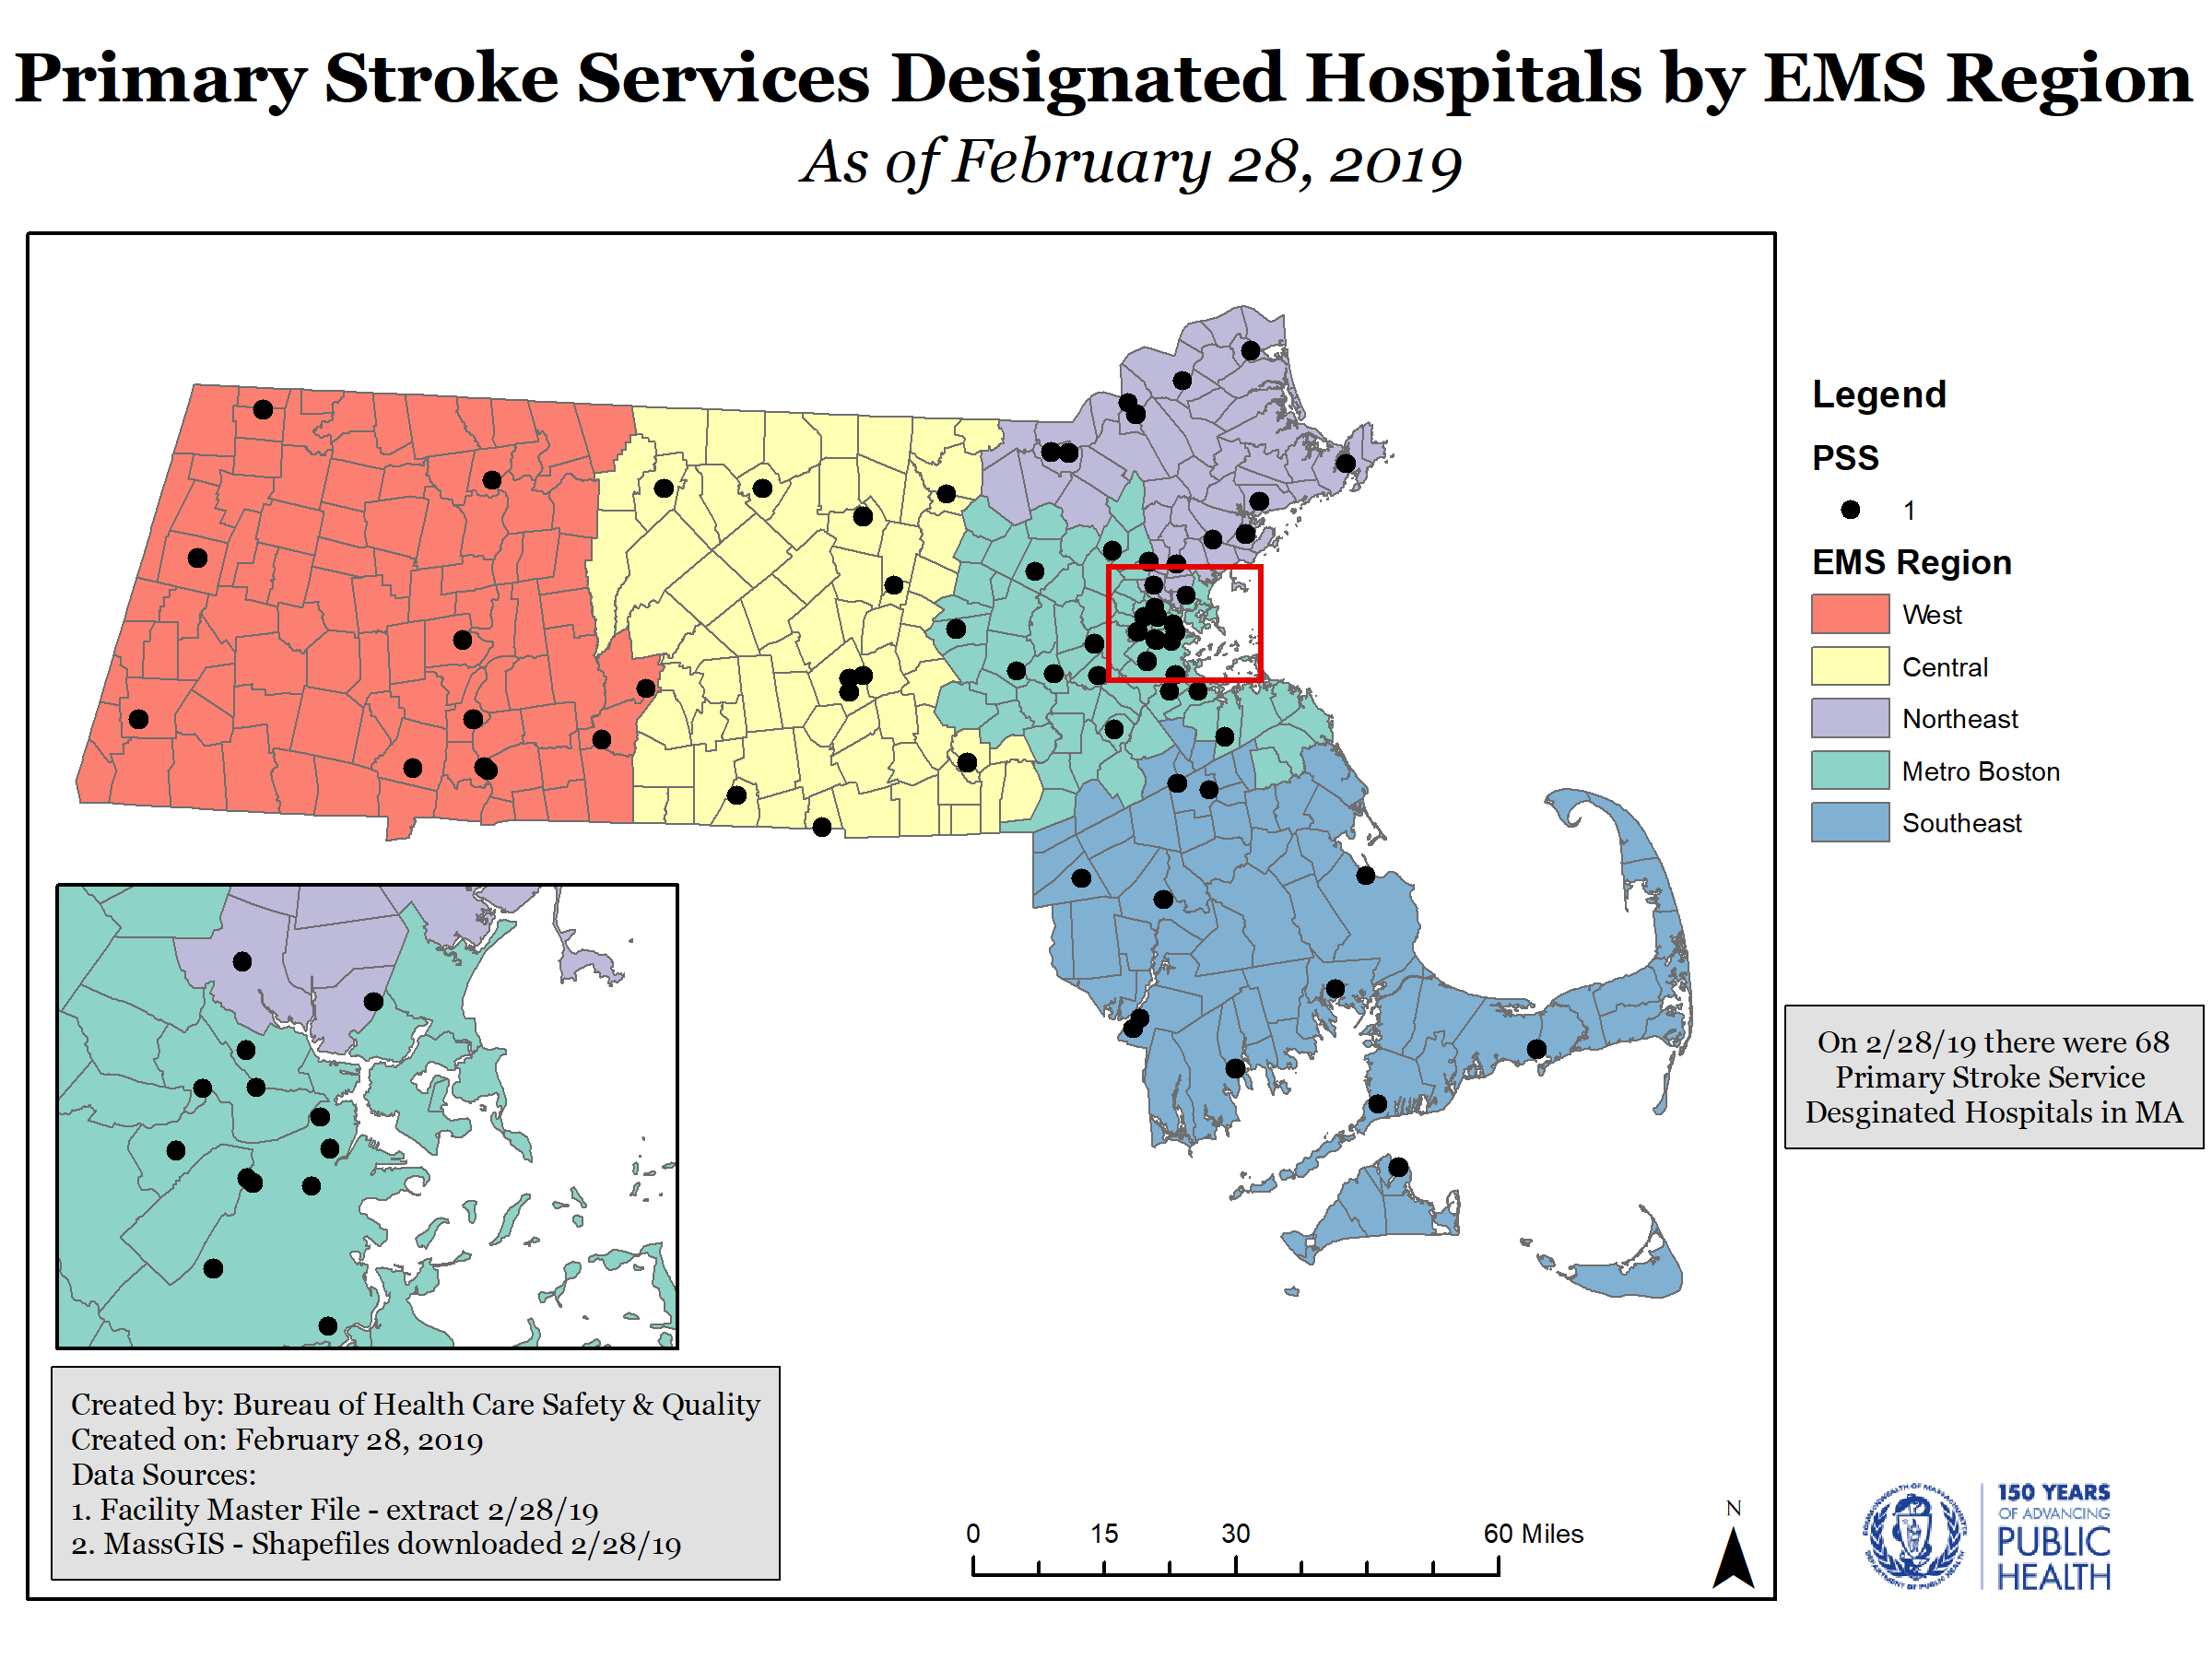 Map of Massachusetts with placement of 68 primary stroke service designated hospitals by location in West, Central, Northeast, Metro Boston, and Southeast regions.